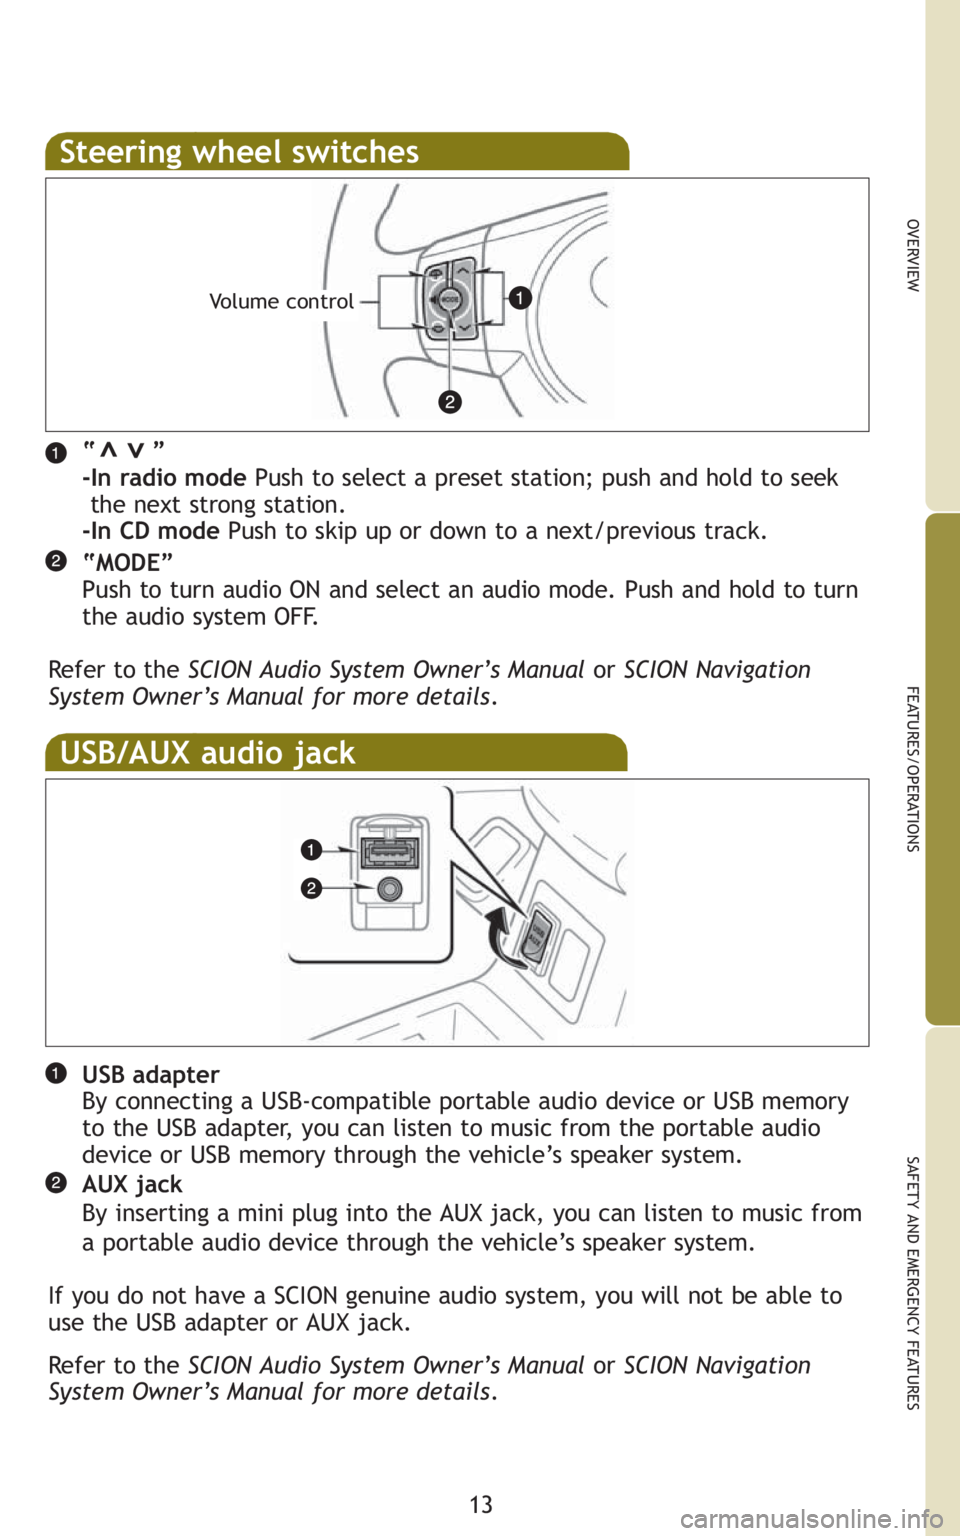 TOYOTA xB 2010  Owners Manual (in English) 13
OVERVIEW
FEATURES/OPERATIONS
SAFETY AND EMERGENCY FEATURES
Steering wheel switches
“       ”
-In radio modePush to select a preset station; push and hold to seek  
the next strong station. 
-In